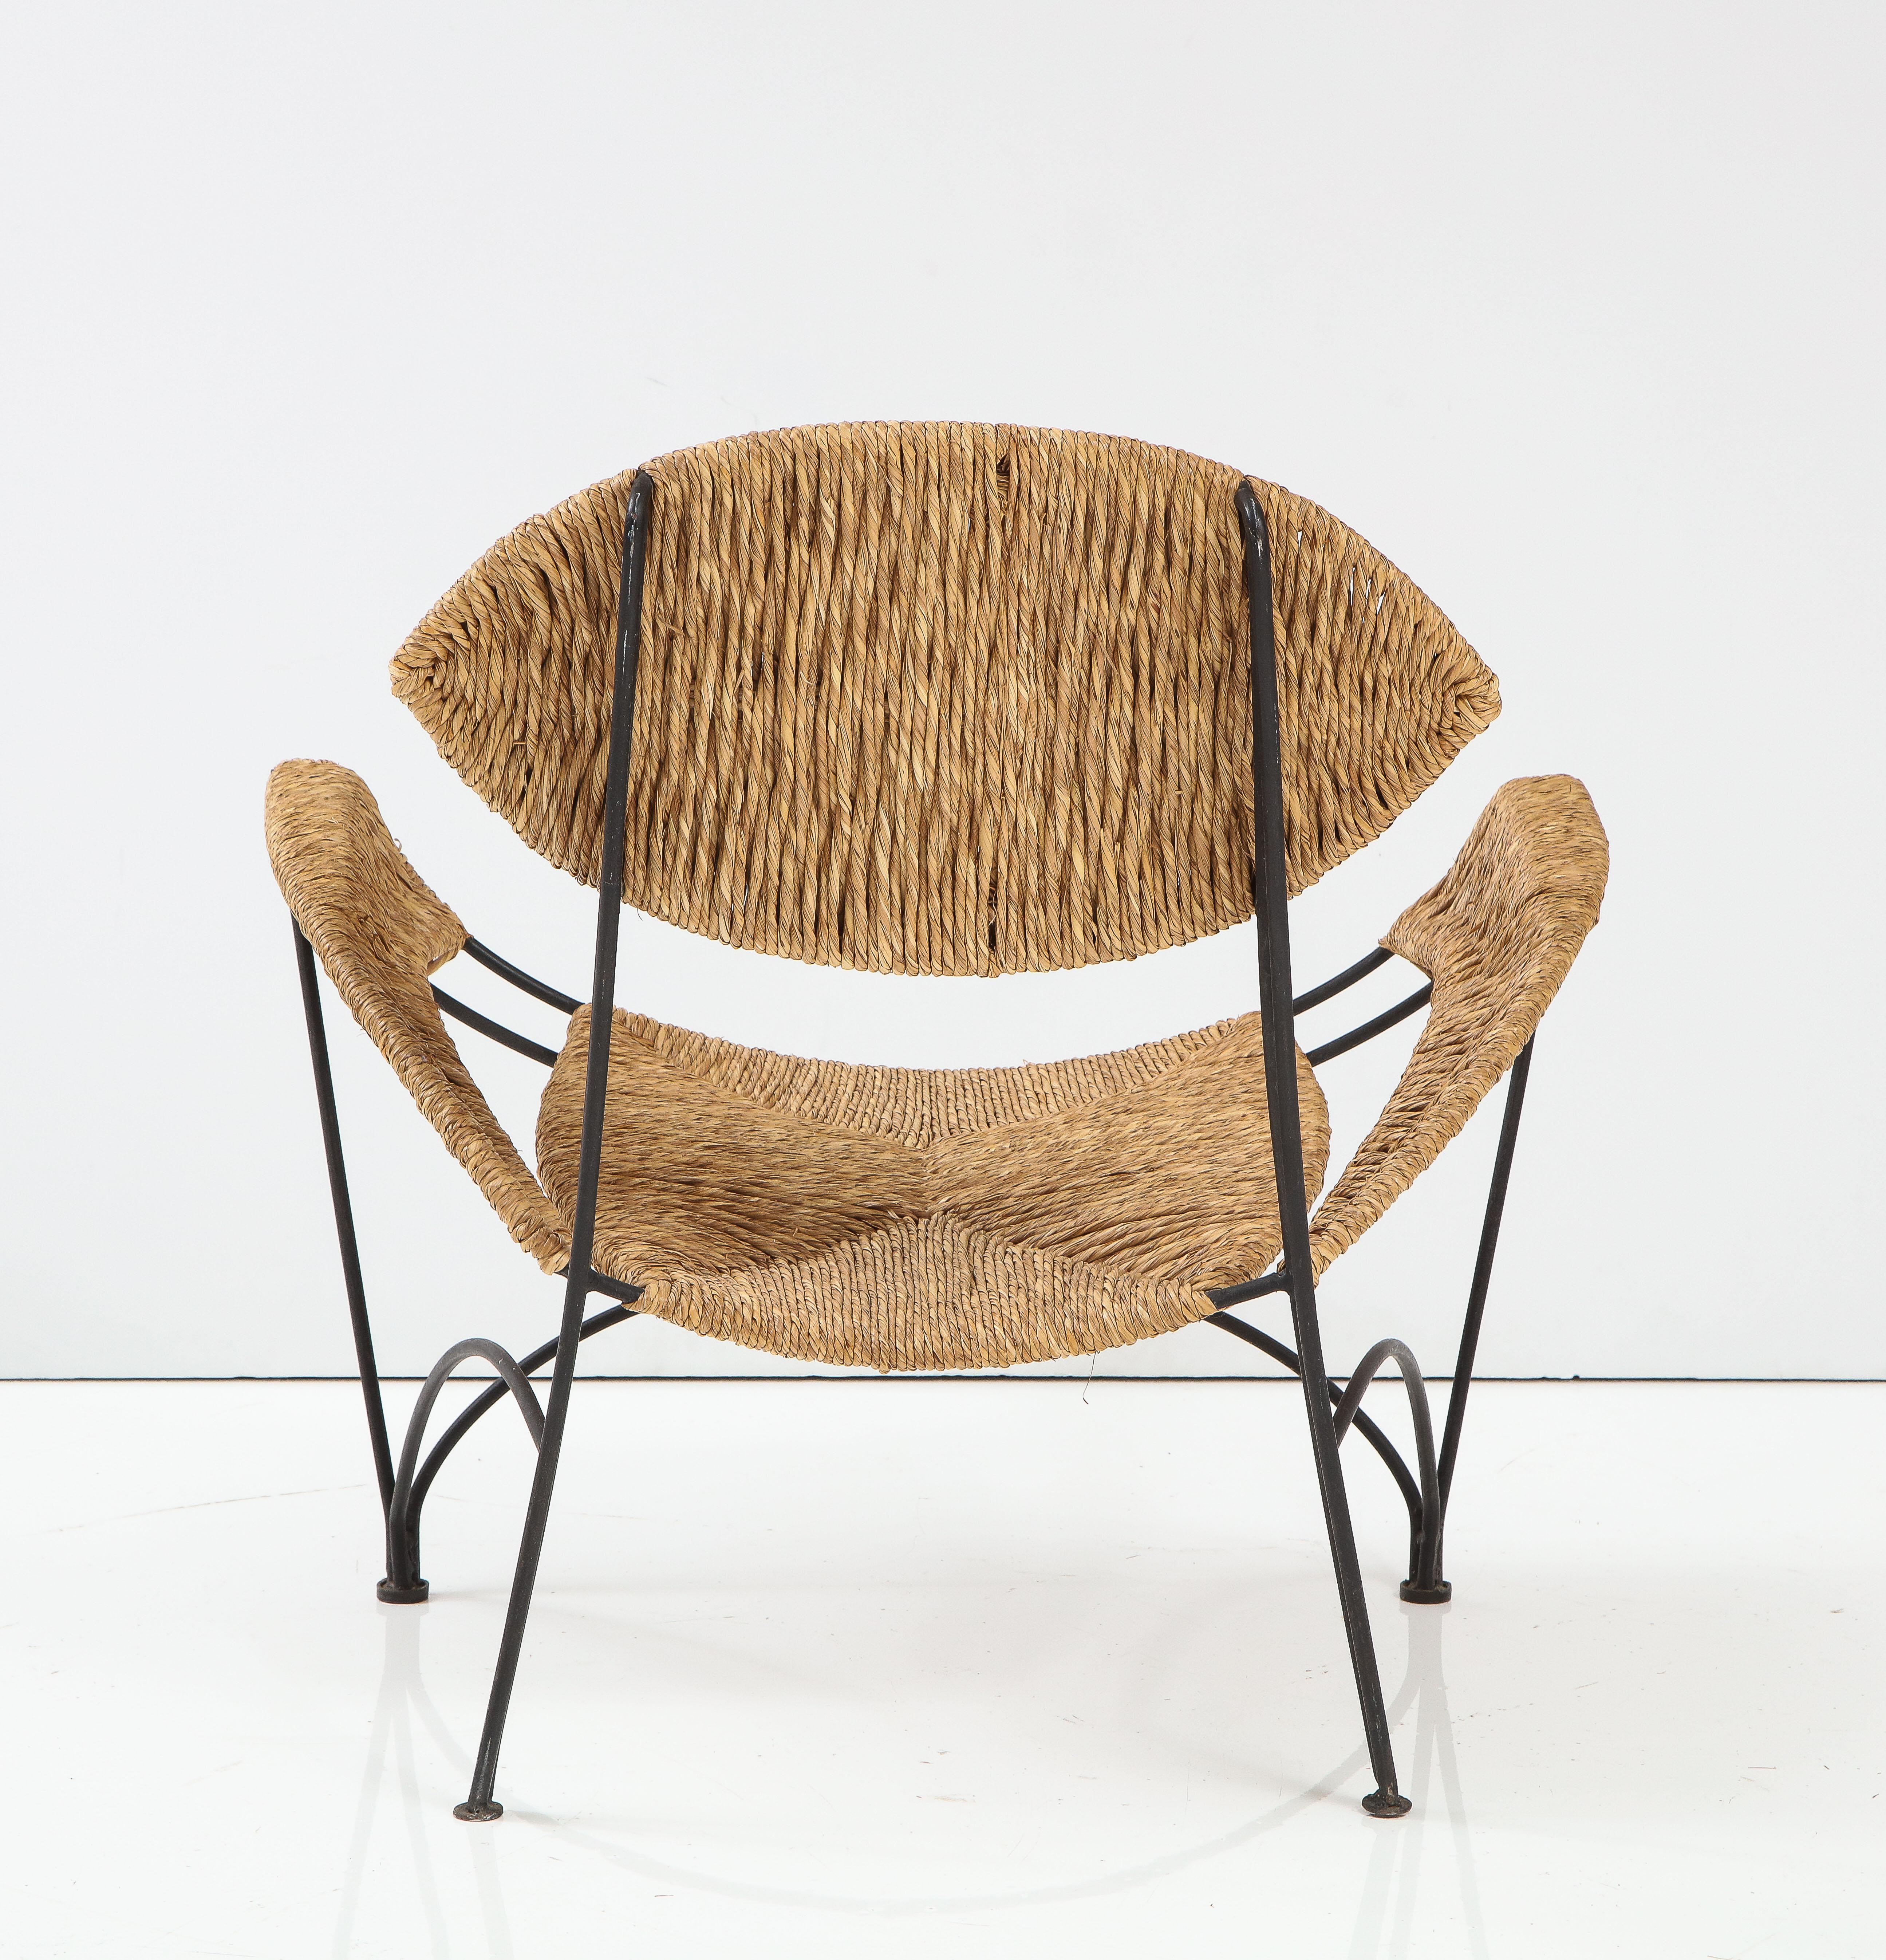 Rattan Banana Chair by Tom Dixon, Produced for Cappellini, 1988